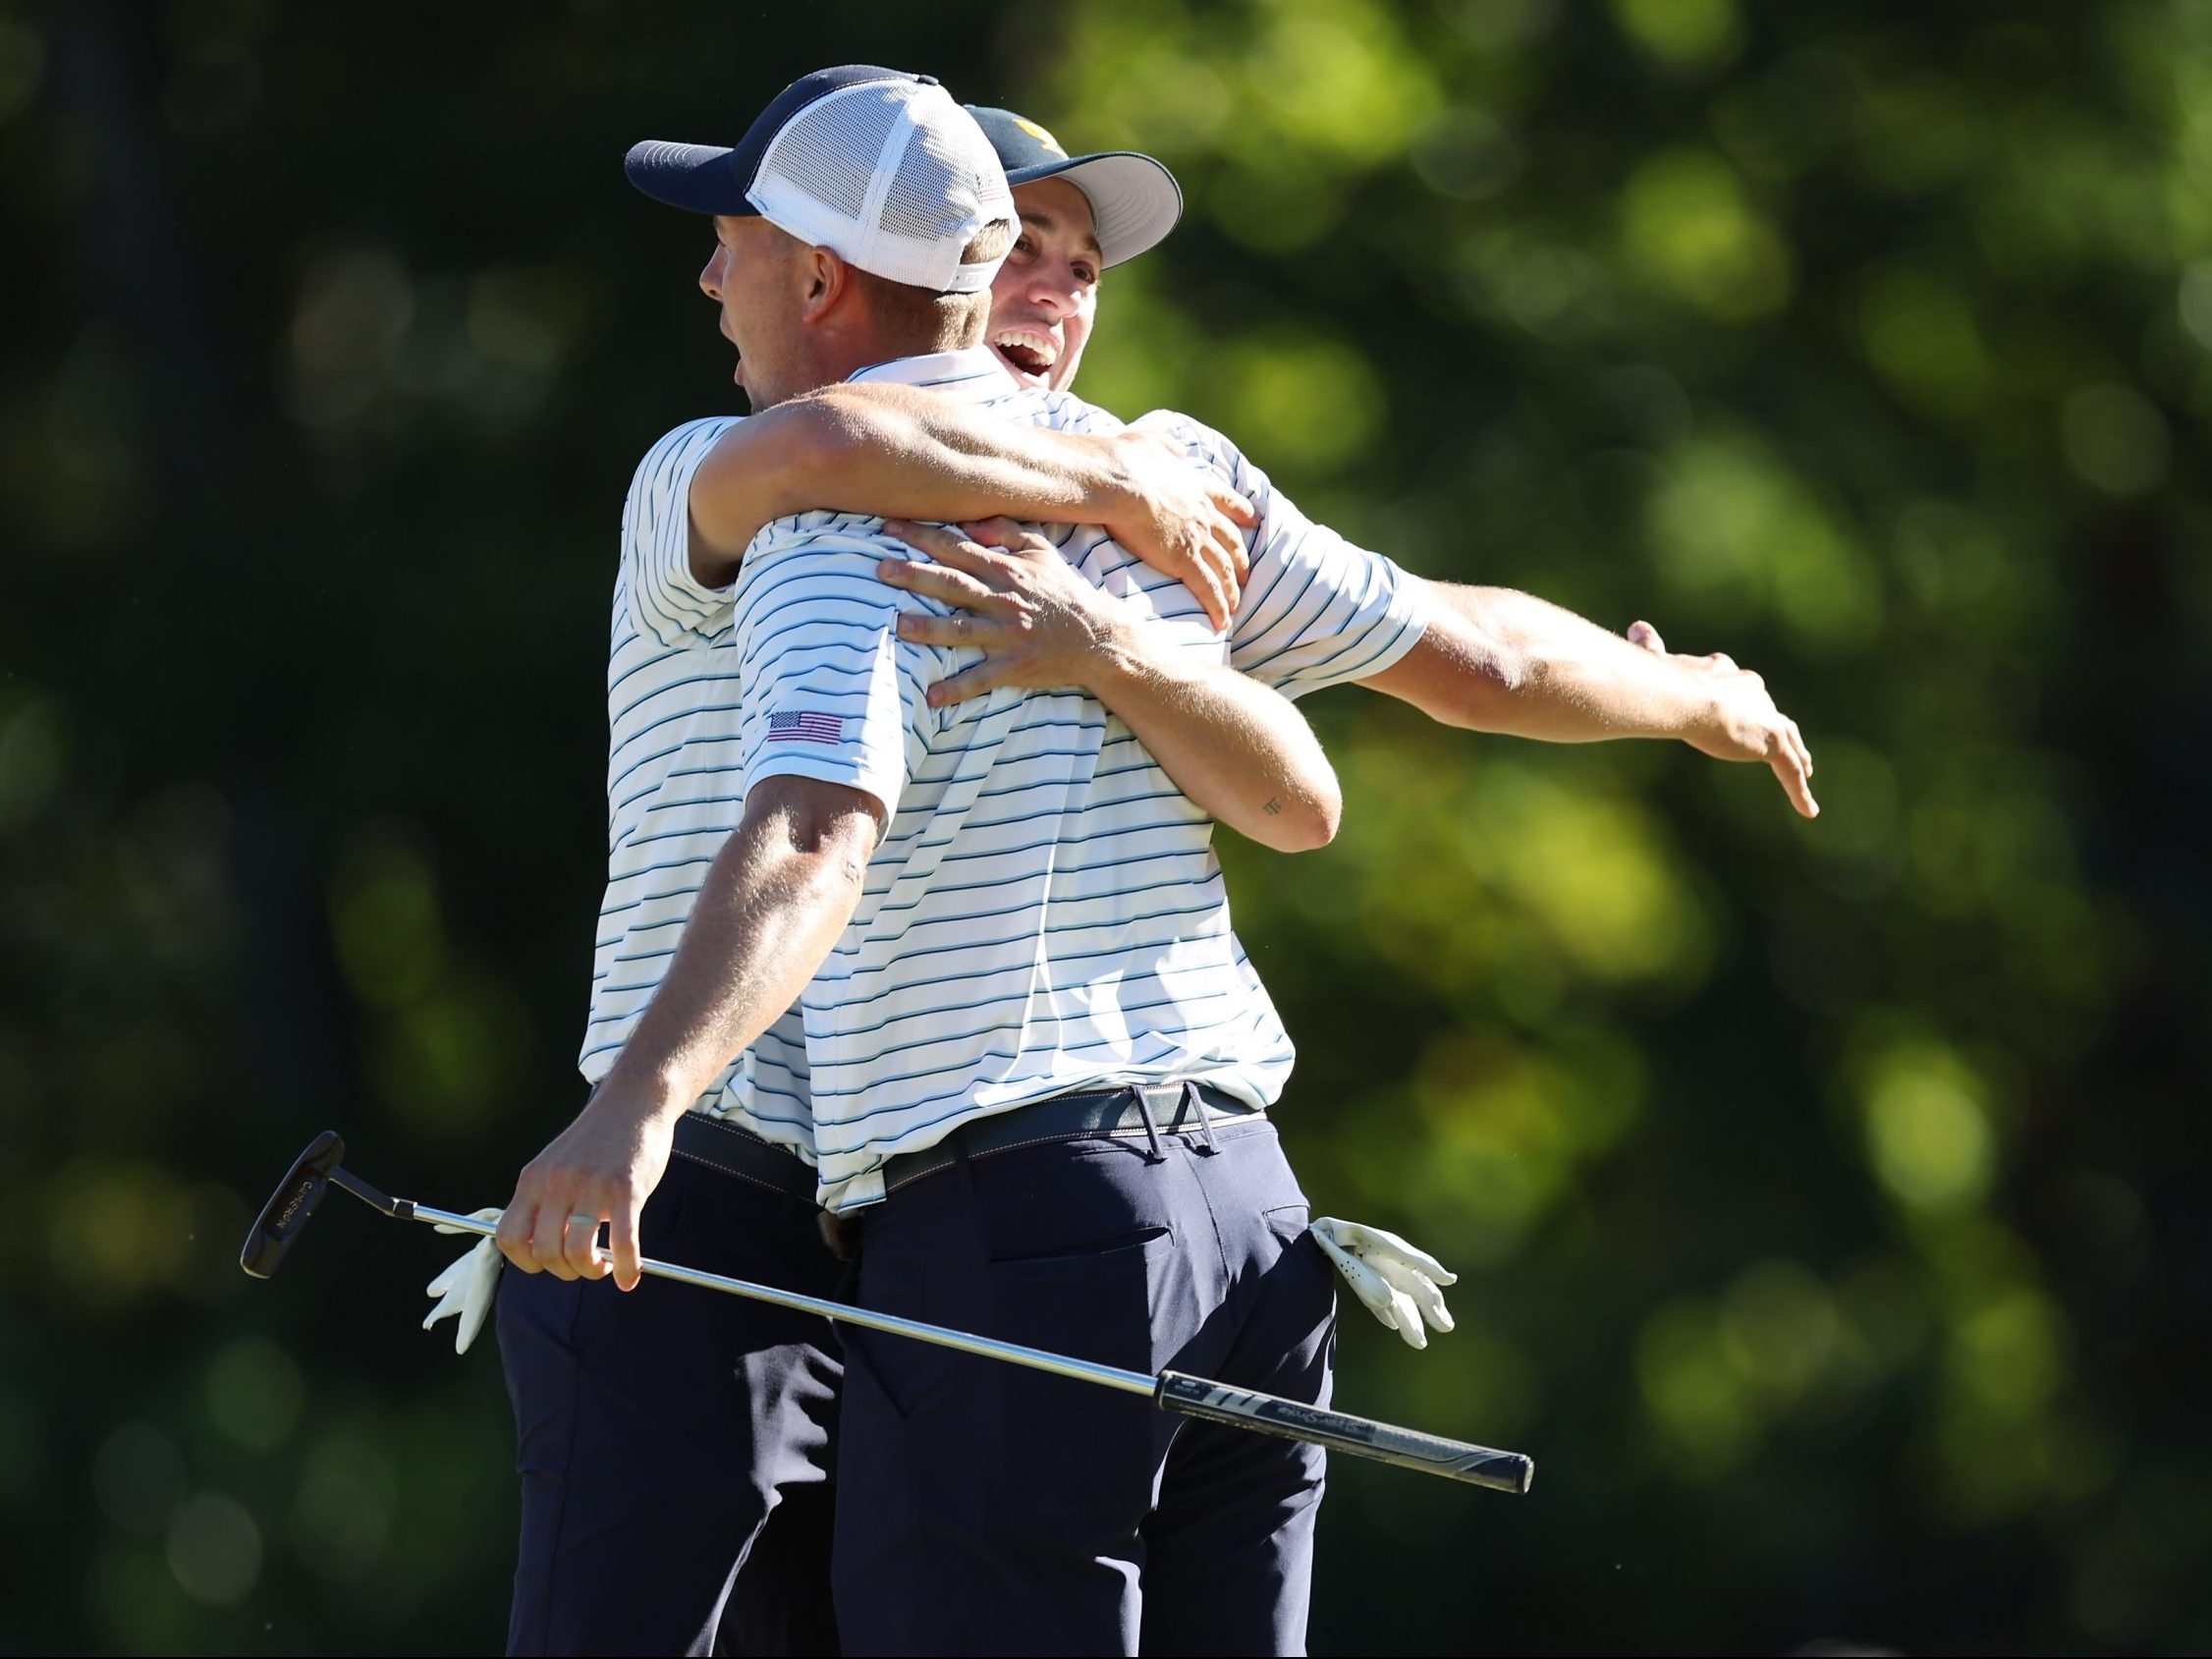 PRESIDENTS CUP: The American rout is on heading to weekend - Kincardine News